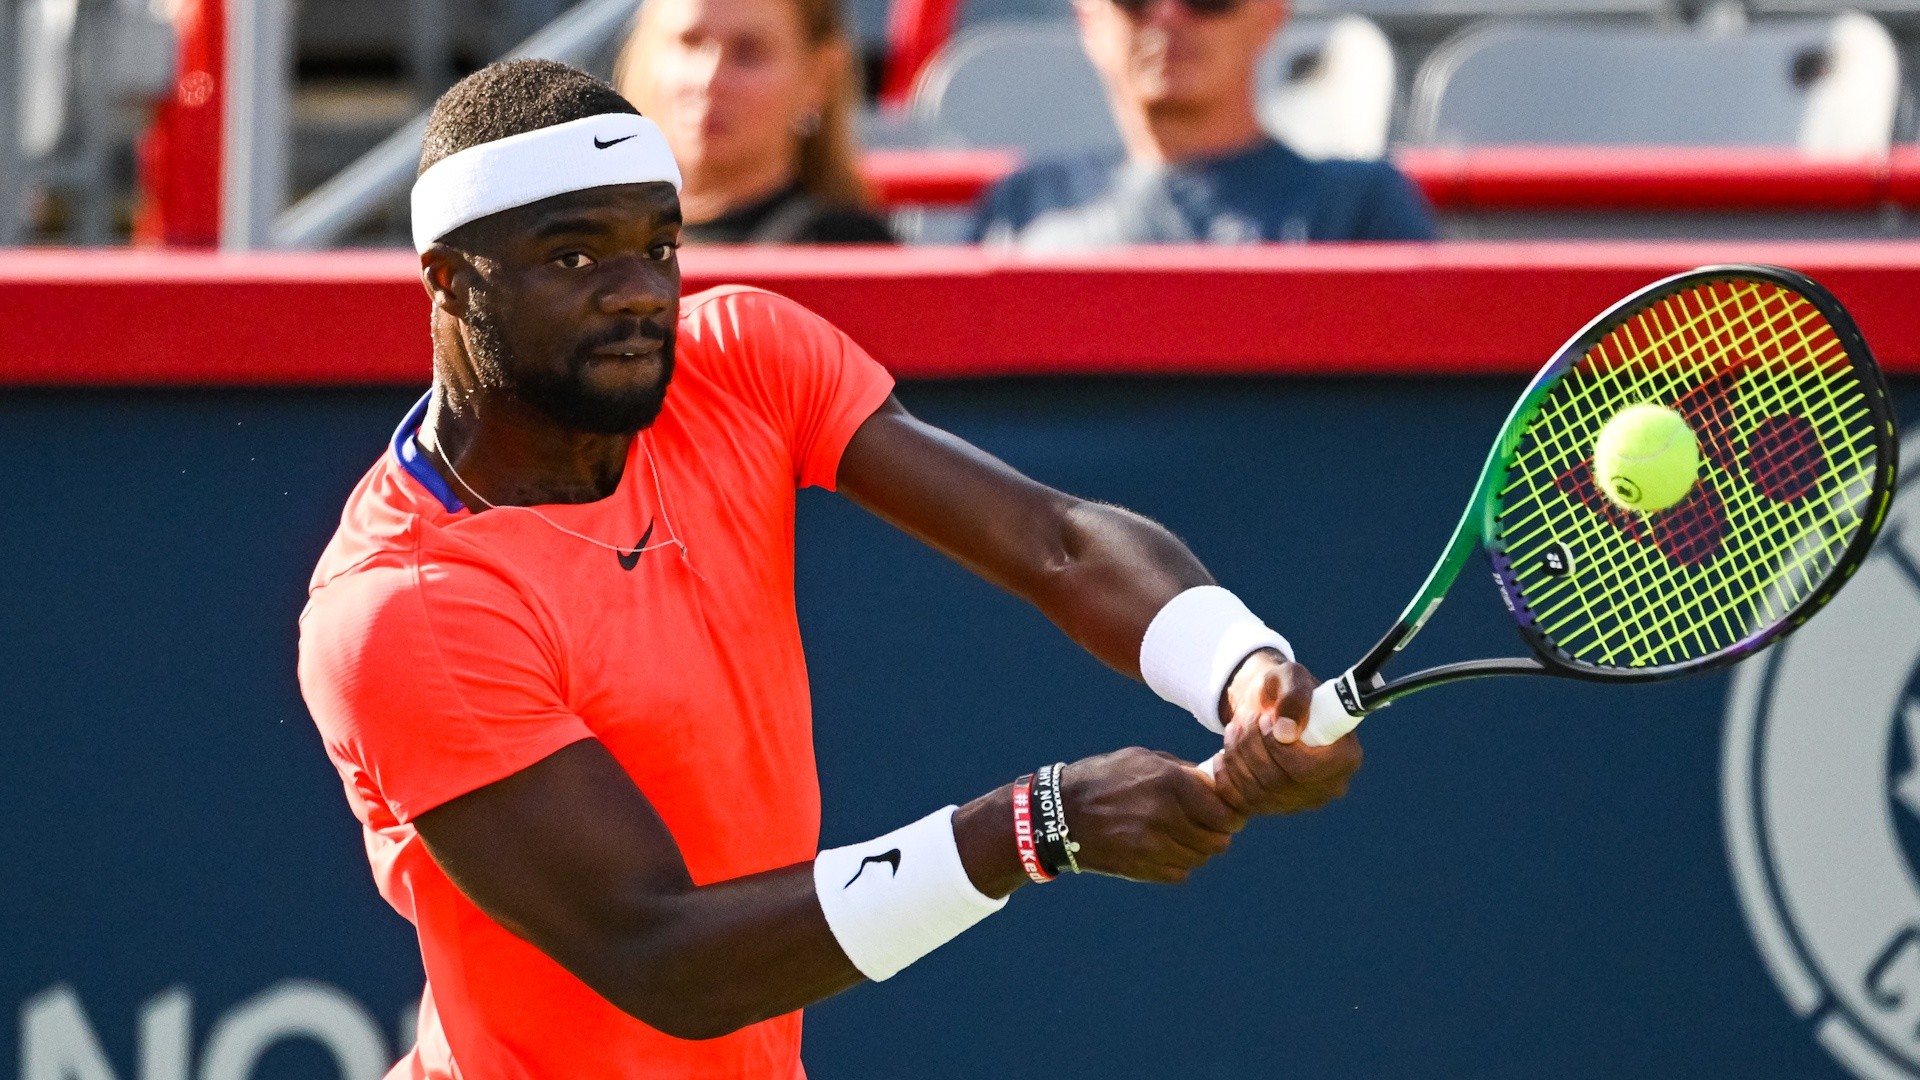 5 things to know about Marylands Frances Tiafoe